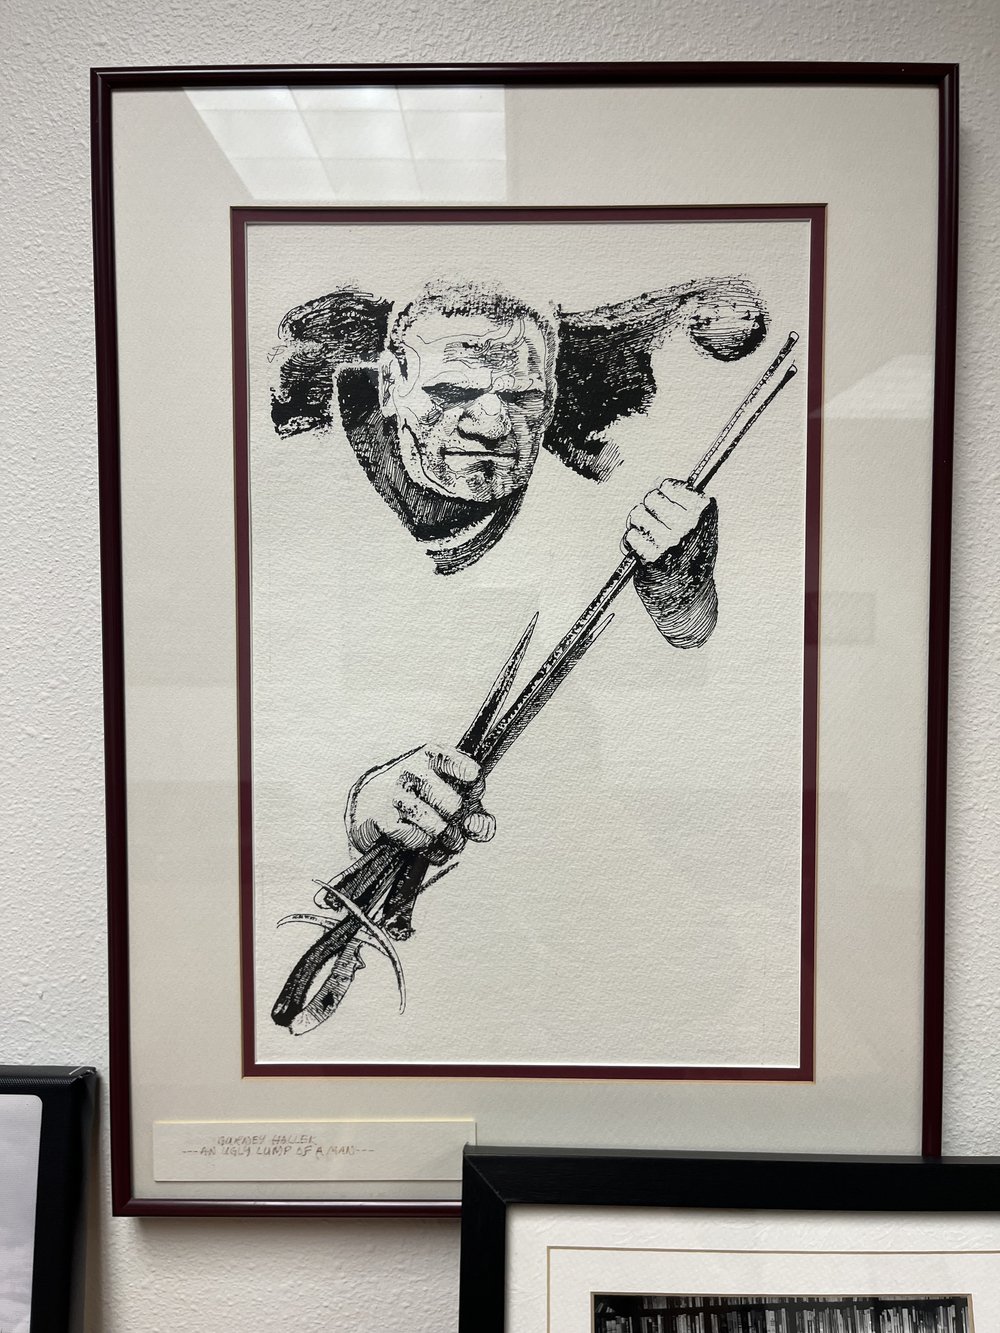  An original illustration of Gurney Halleck on display in the Herbert Room at the Siuslaw Public Library in Florence, Oregon.  Photo by Justine Paradis. 